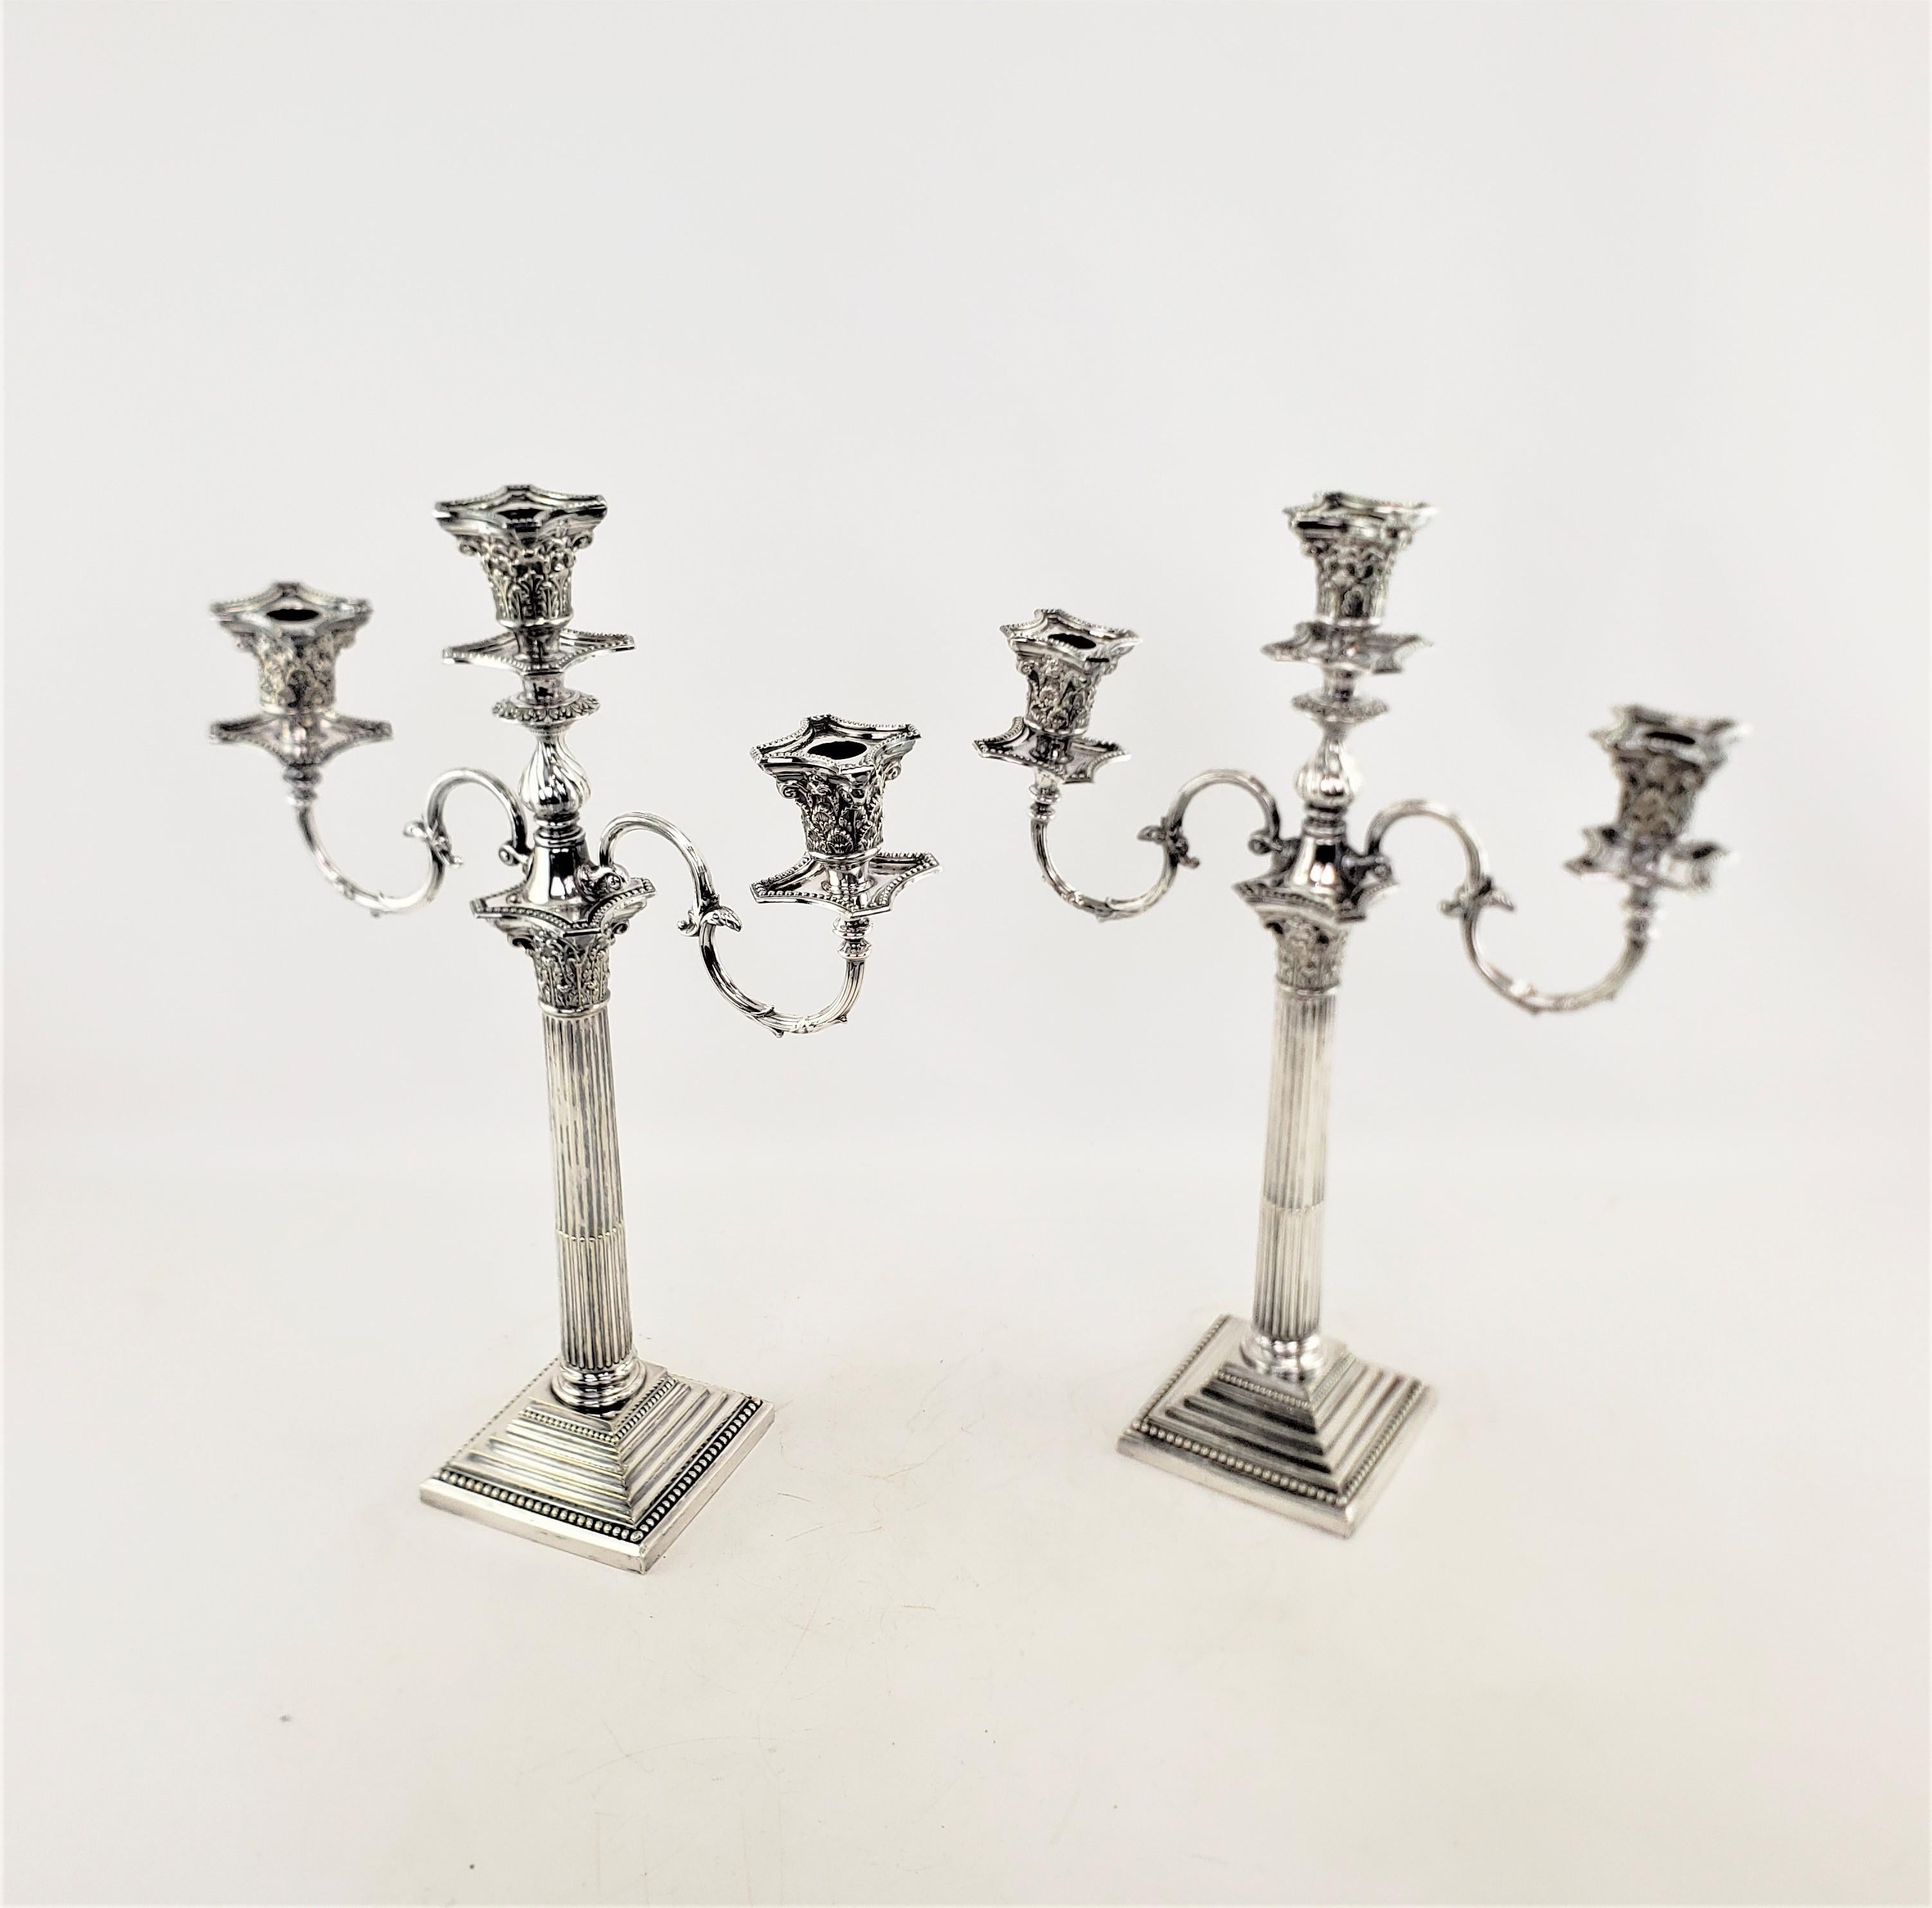 Pair of Antique Mappin & Webb Convertible Candelabras in Corinthian Column Style For Sale 1